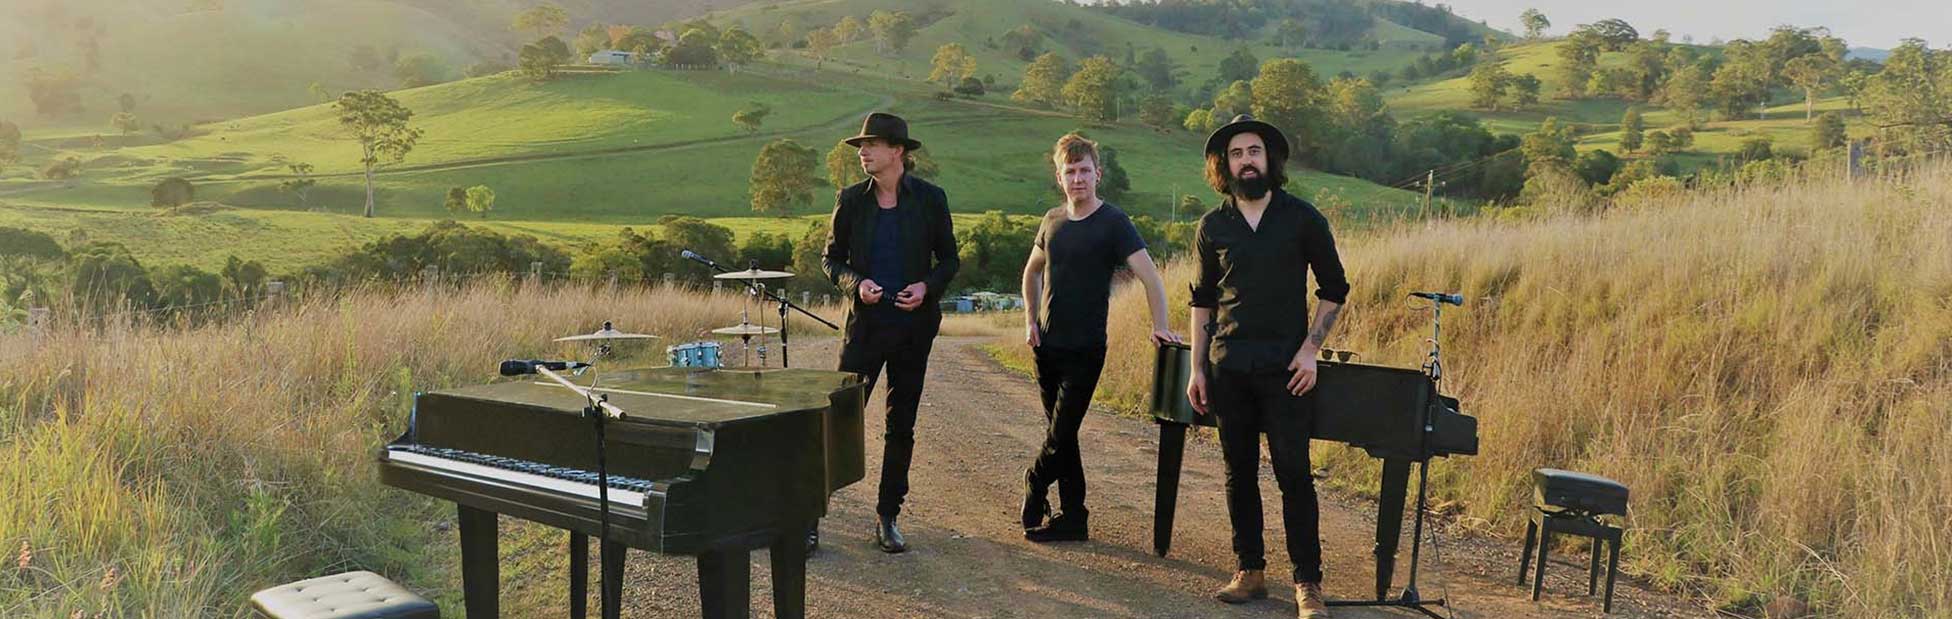 Three men in black posing on countryside dirt road with their musical instruments